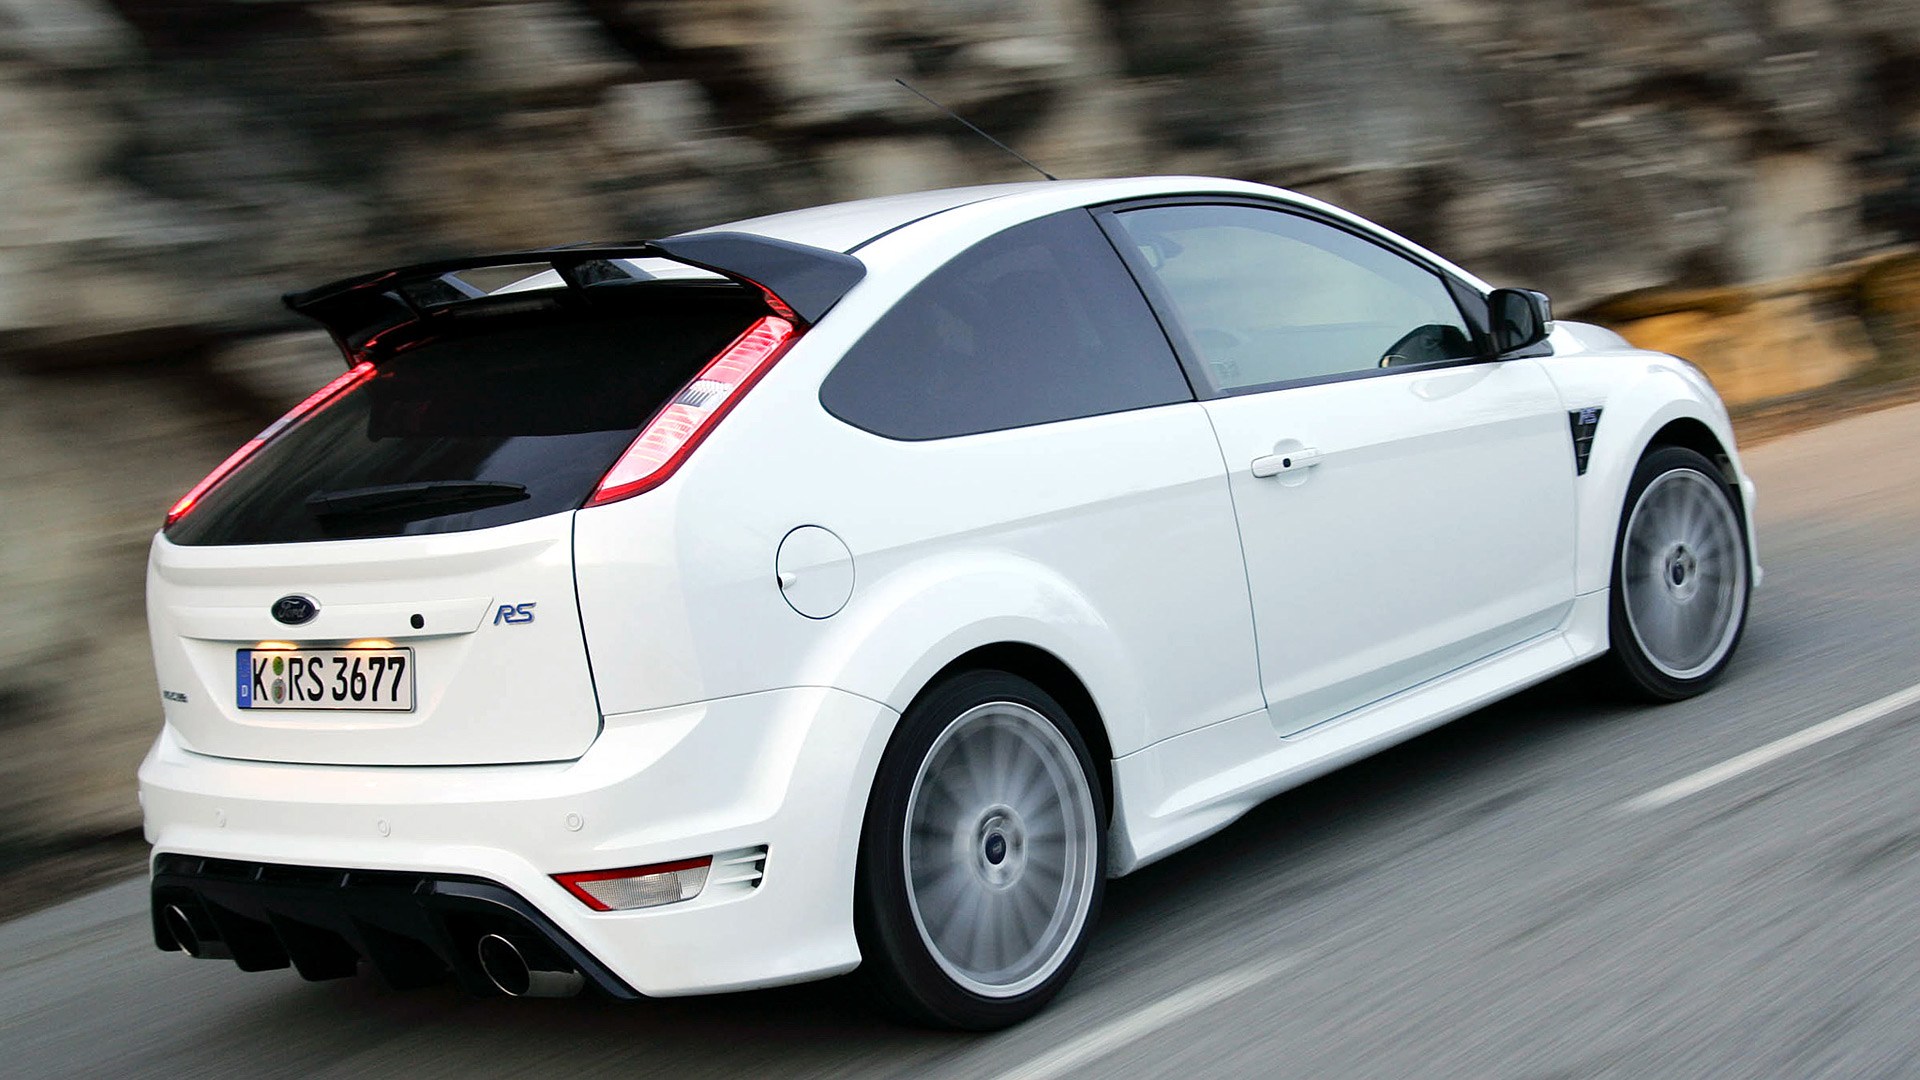  2009 Ford Focus RS Wallpaper.